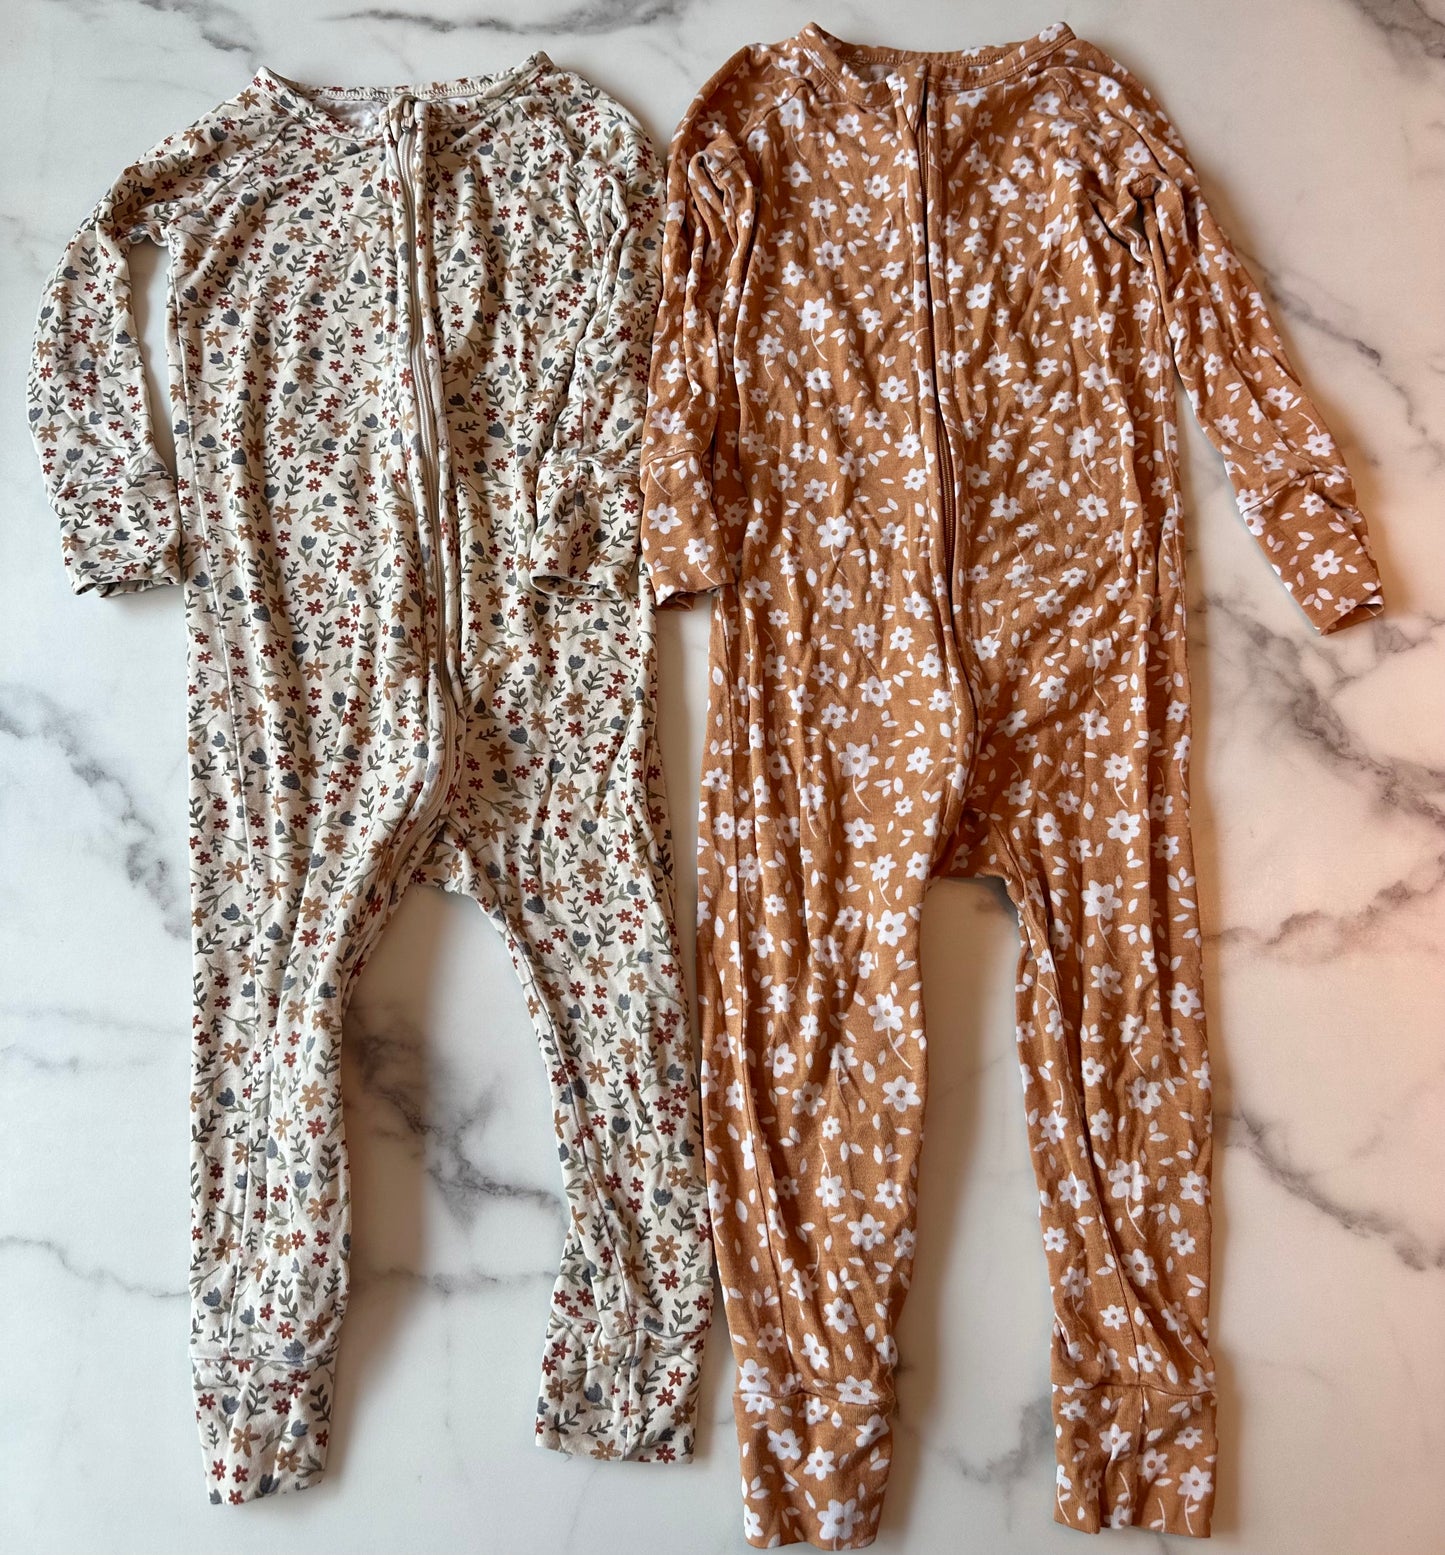 Brave Little Ones Bamboo pajama sleepers 18-24 months, 2 pair